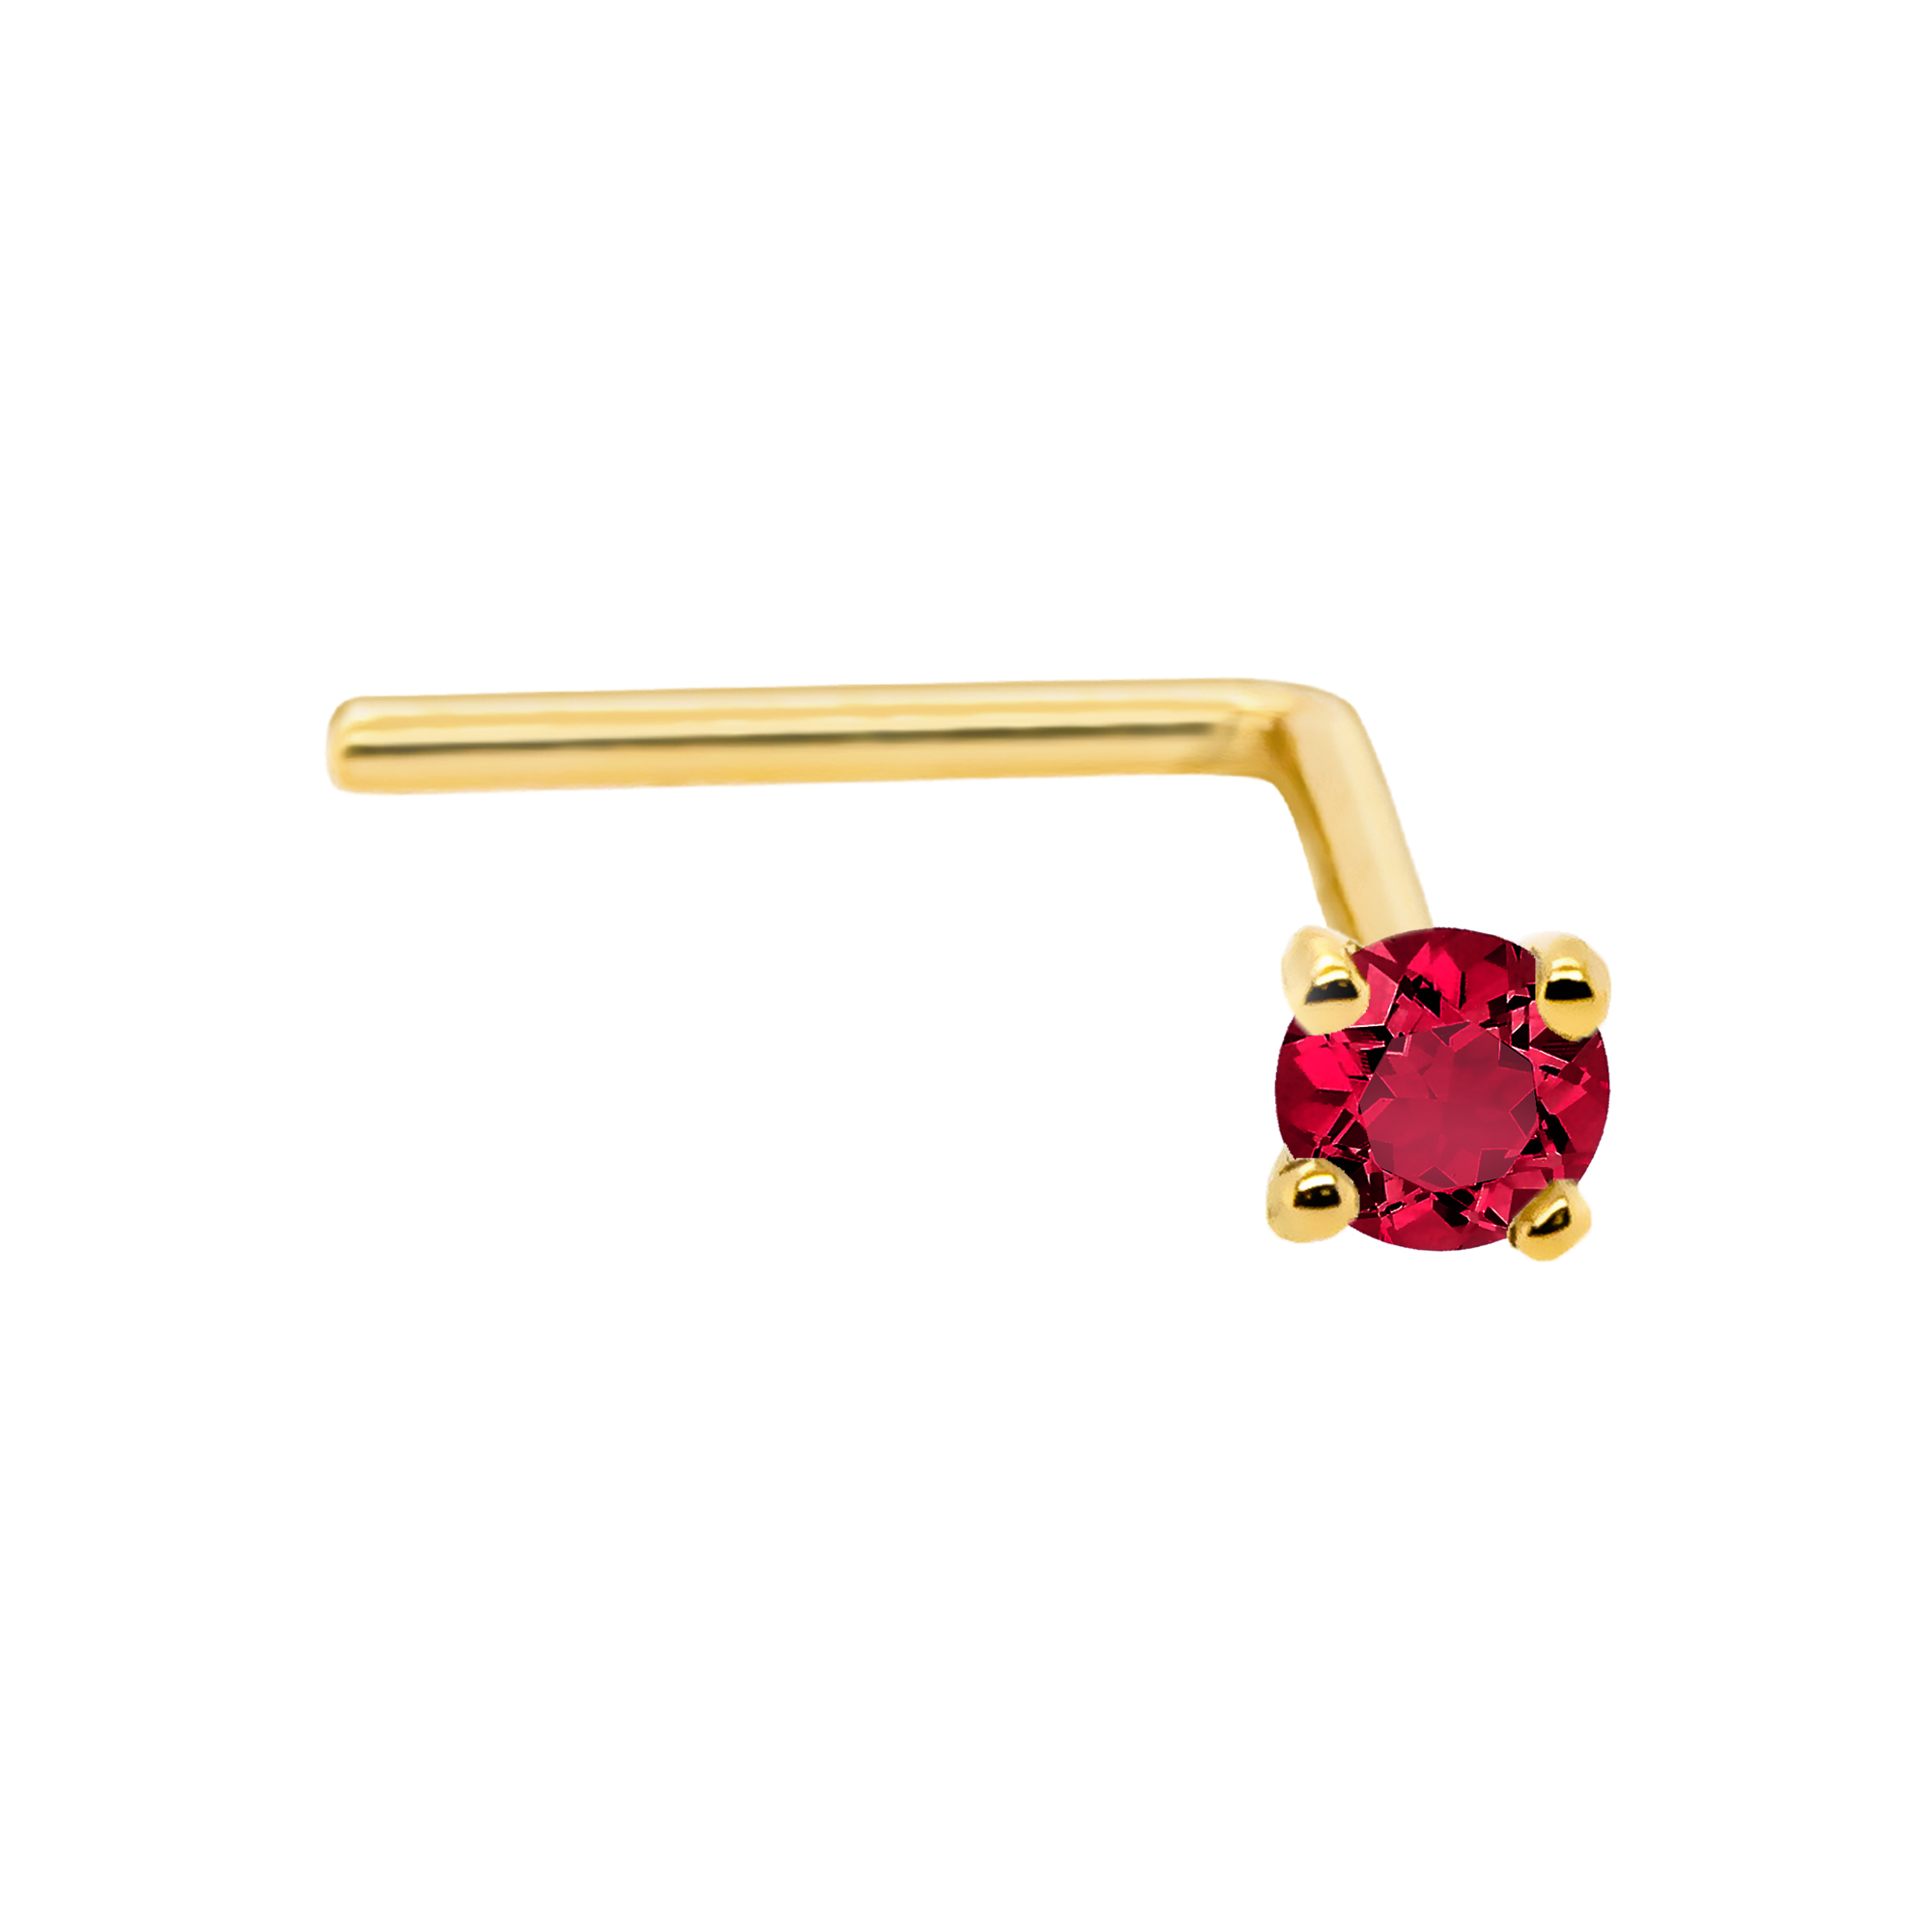 22G Solid 14Kt Gold L-Shape Nose Stud with real Ruby Gemstone, 14kt Yellow Gold or 14kt White Gold Prong Setting - July Birthstone Nose Ring